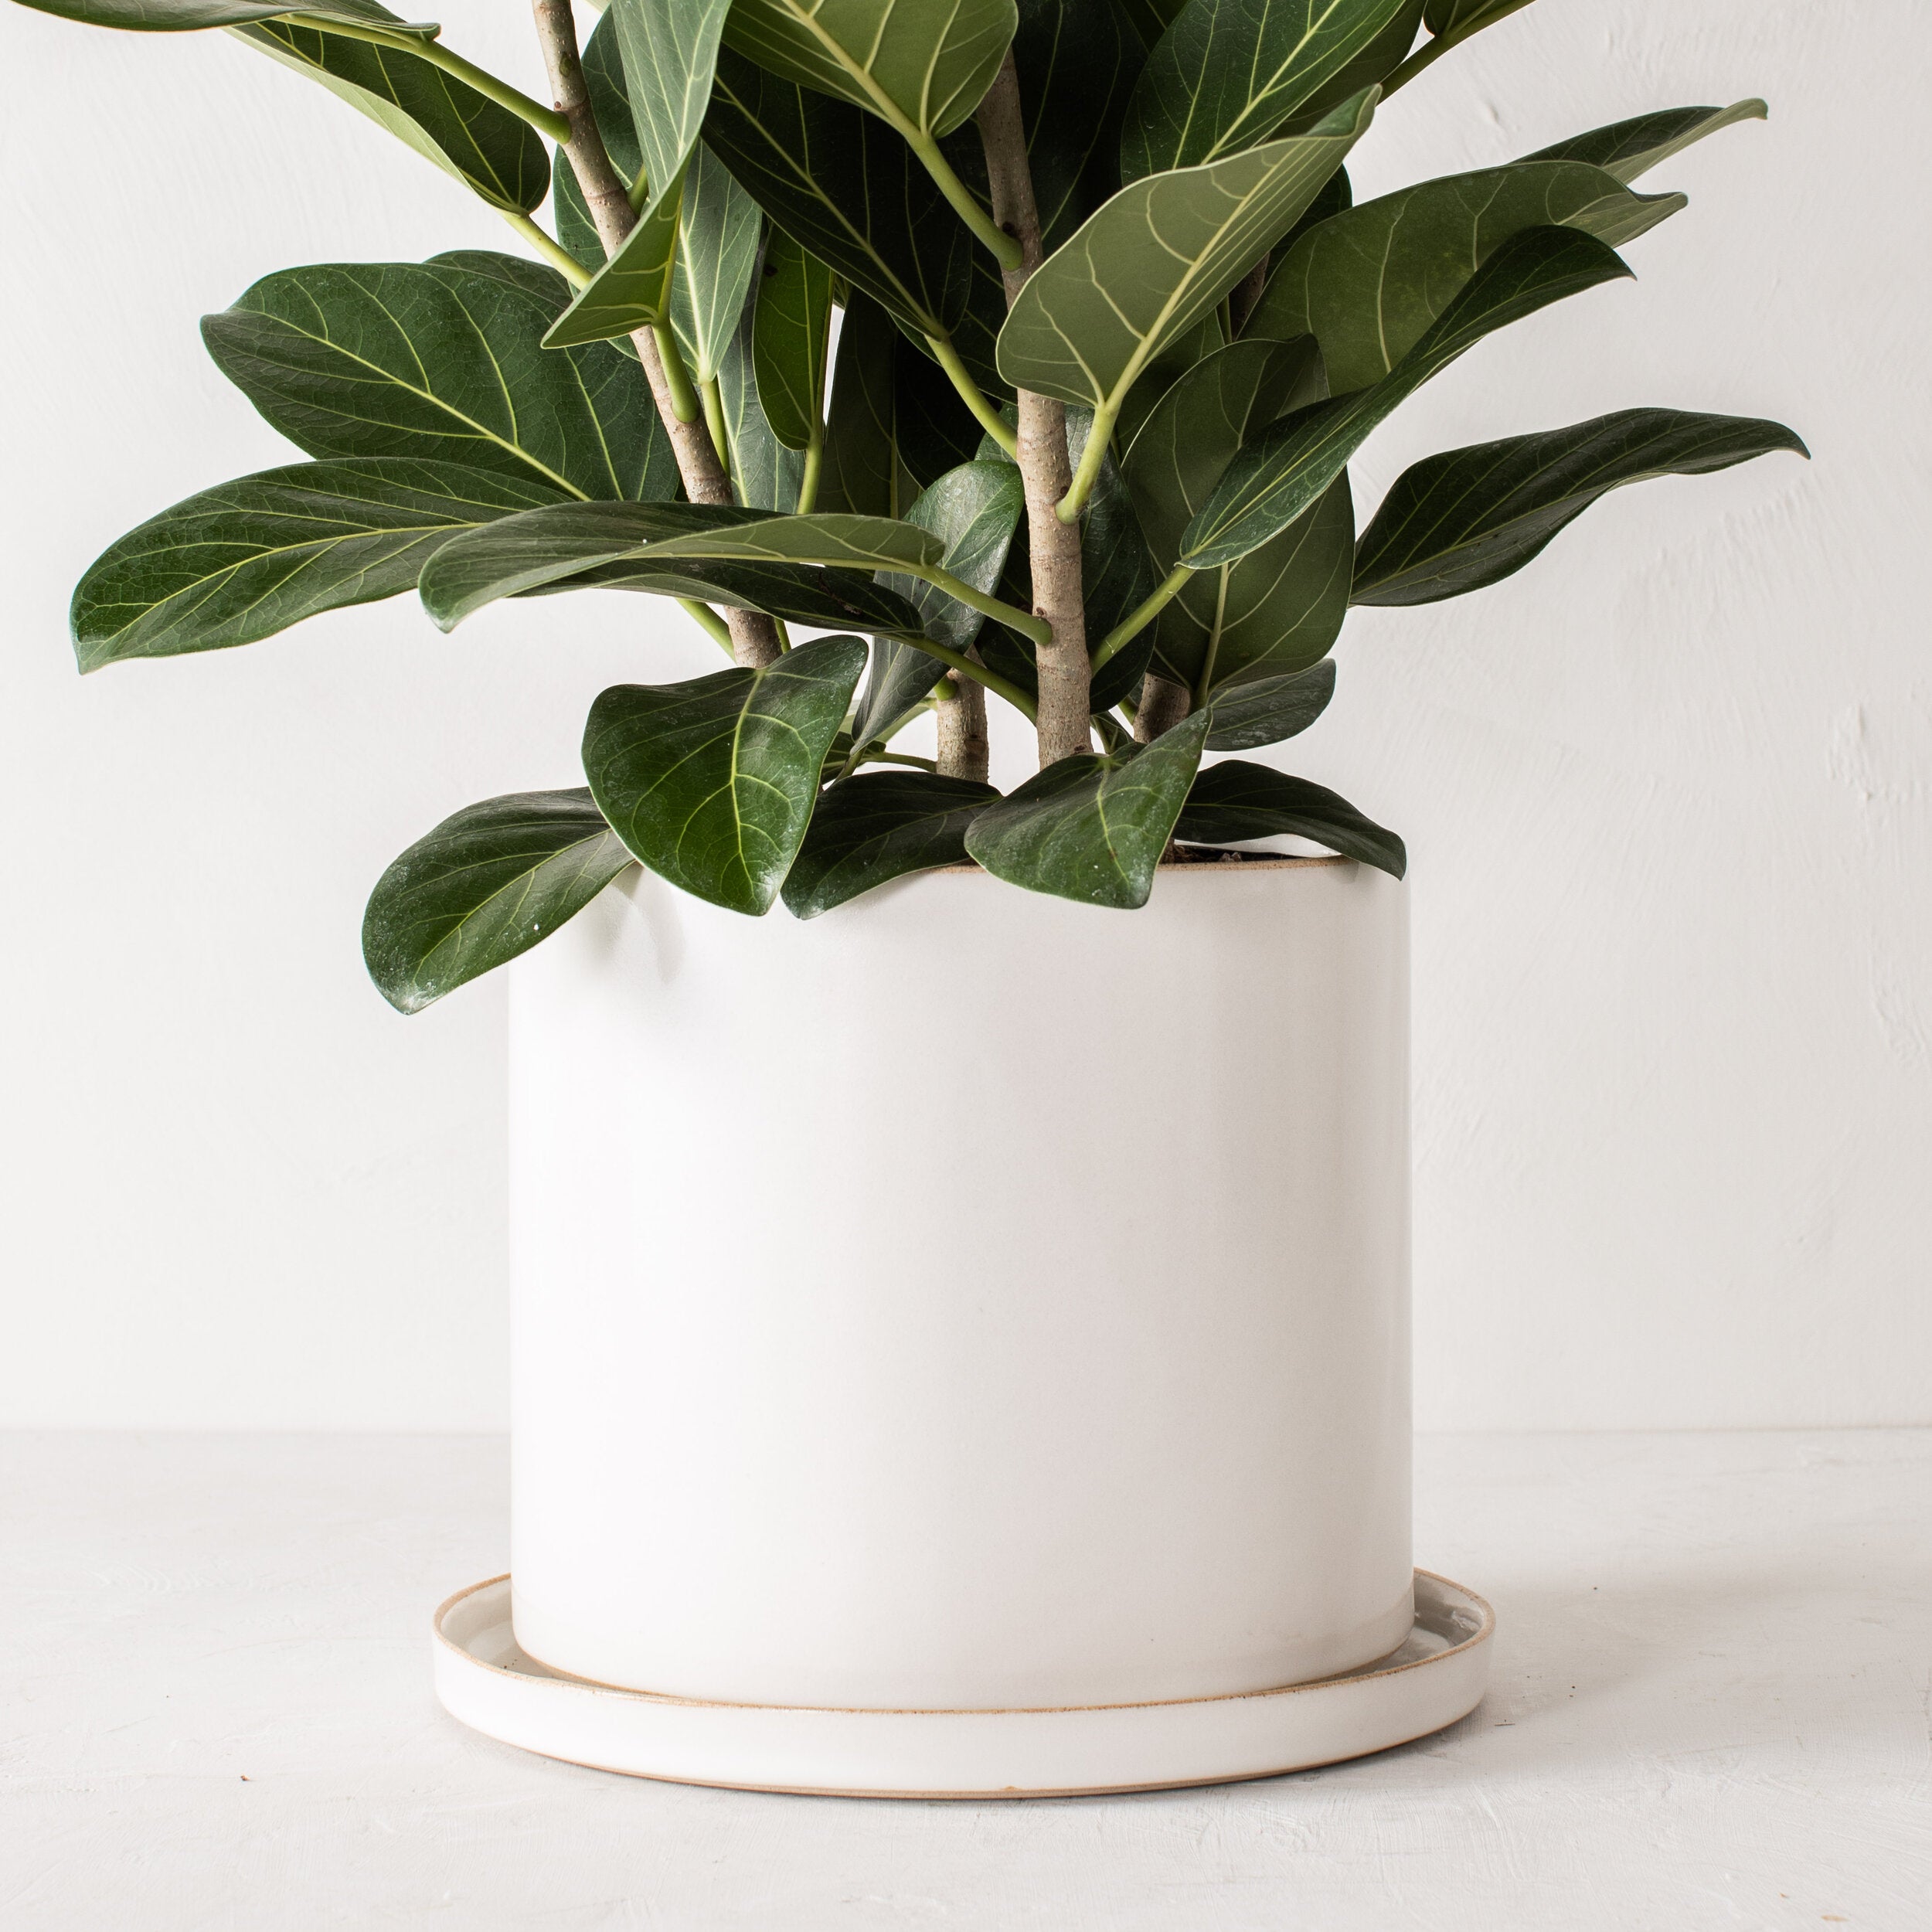 10 inch white ceramic planter with a bottom drainage dish. Staged on a white plaster textured tabletop against a plaster textured white wall. Large tall fiddle leaf plant inside. Designed and sold by Convivial Production, Kansas City Ceramics.  Edit alt text